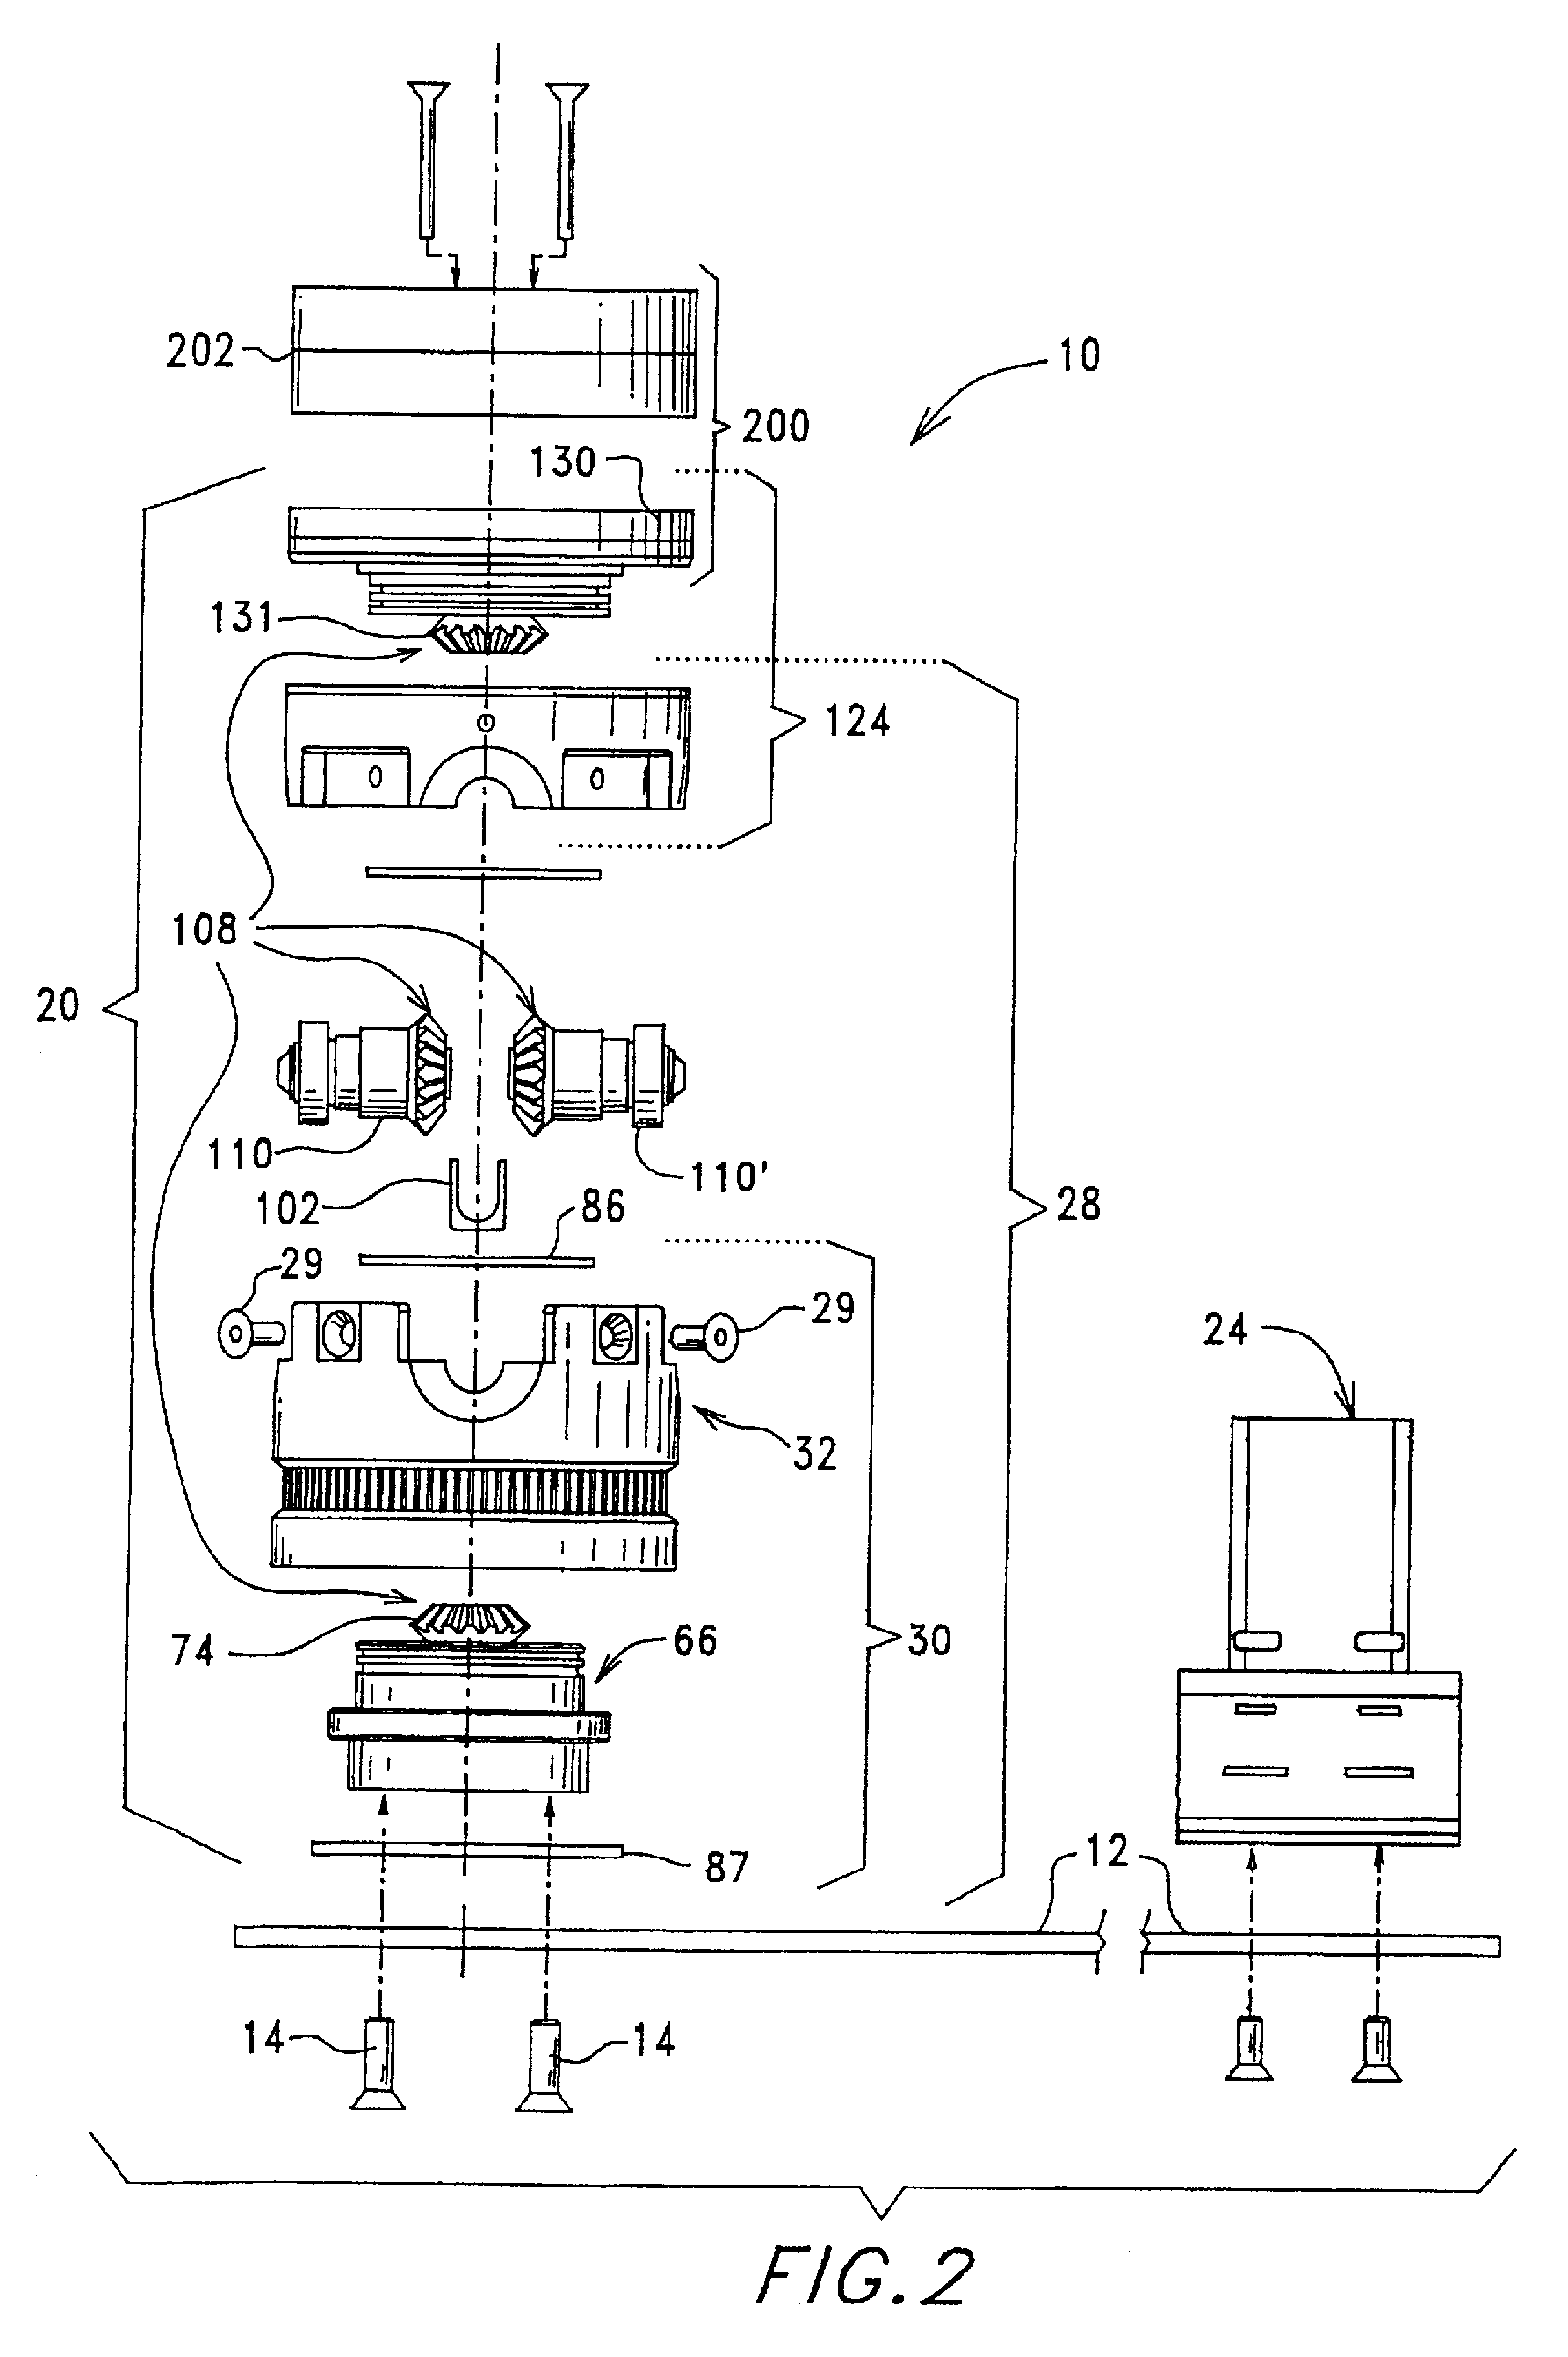 Methods of isolating blood components using a microcentrifuge and uses thereof